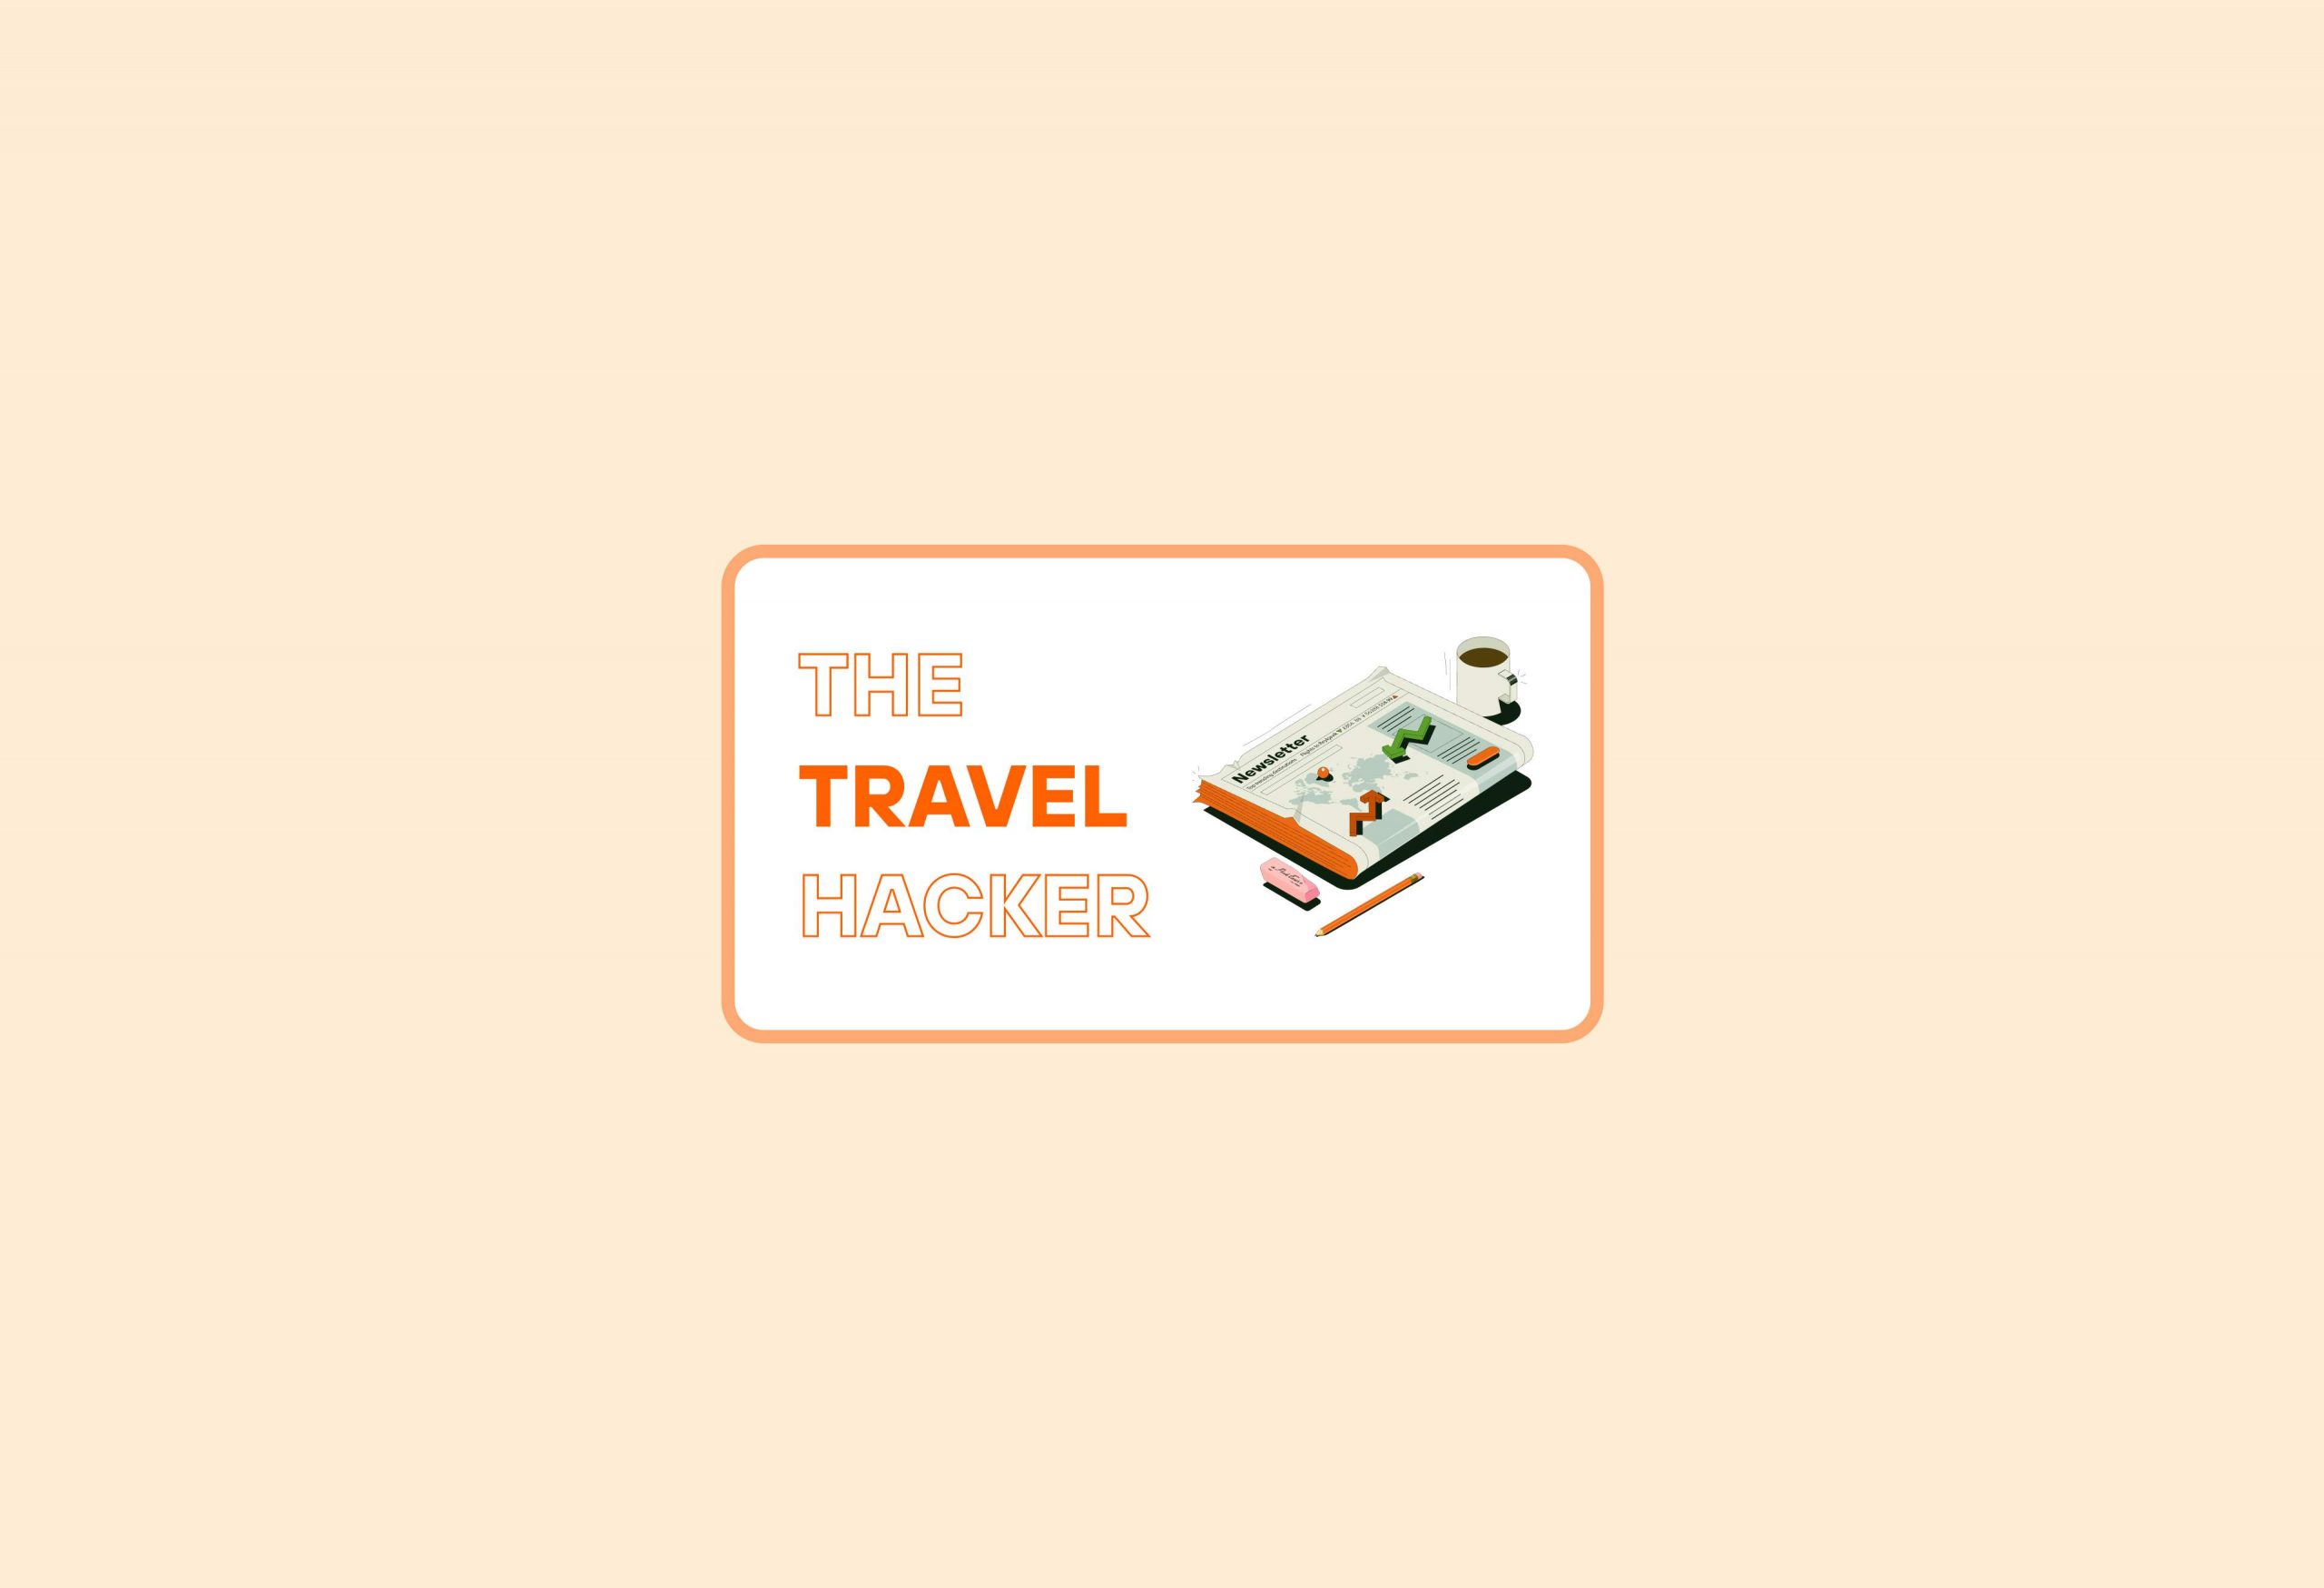 Text on orange background reads: The Travel Hacker. Next to text is an illustration of a newspaper next to an eraser, pencil and cup of coffee.